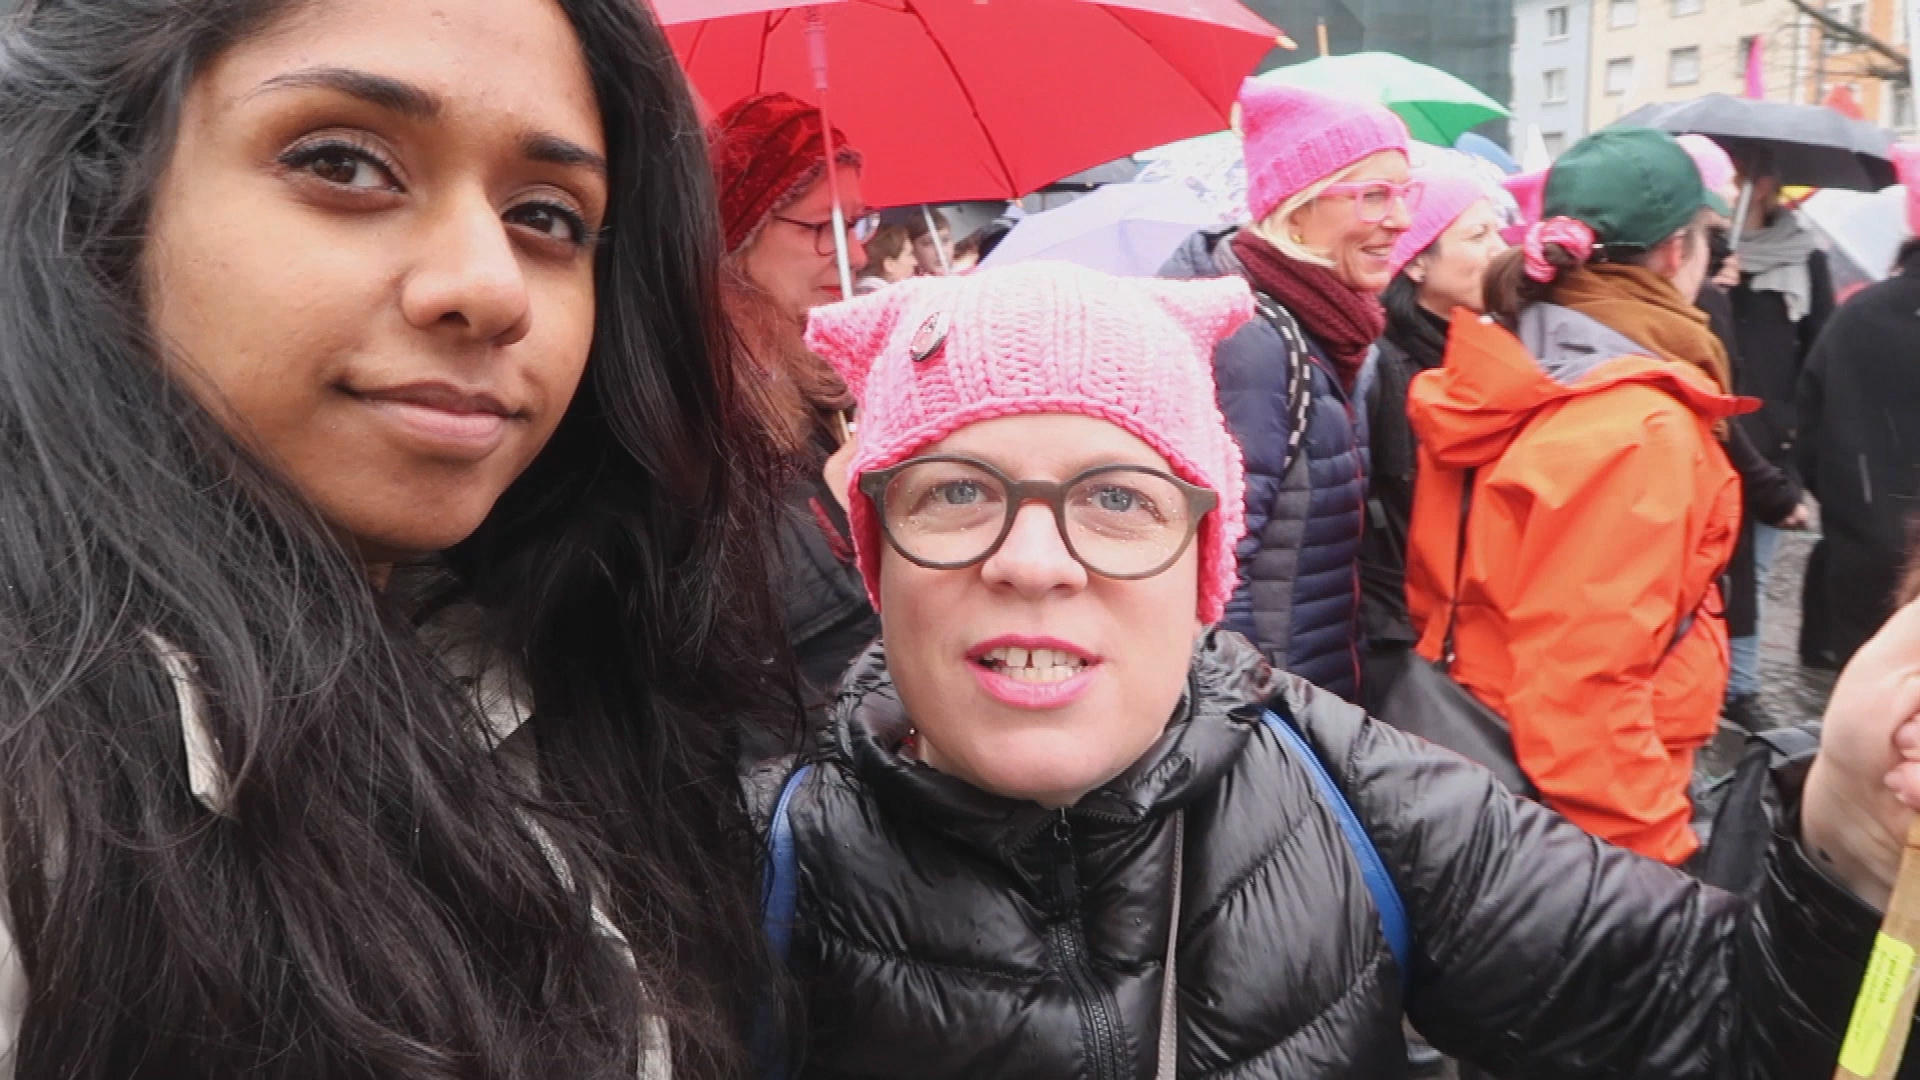 Why women are marching in Zurich.